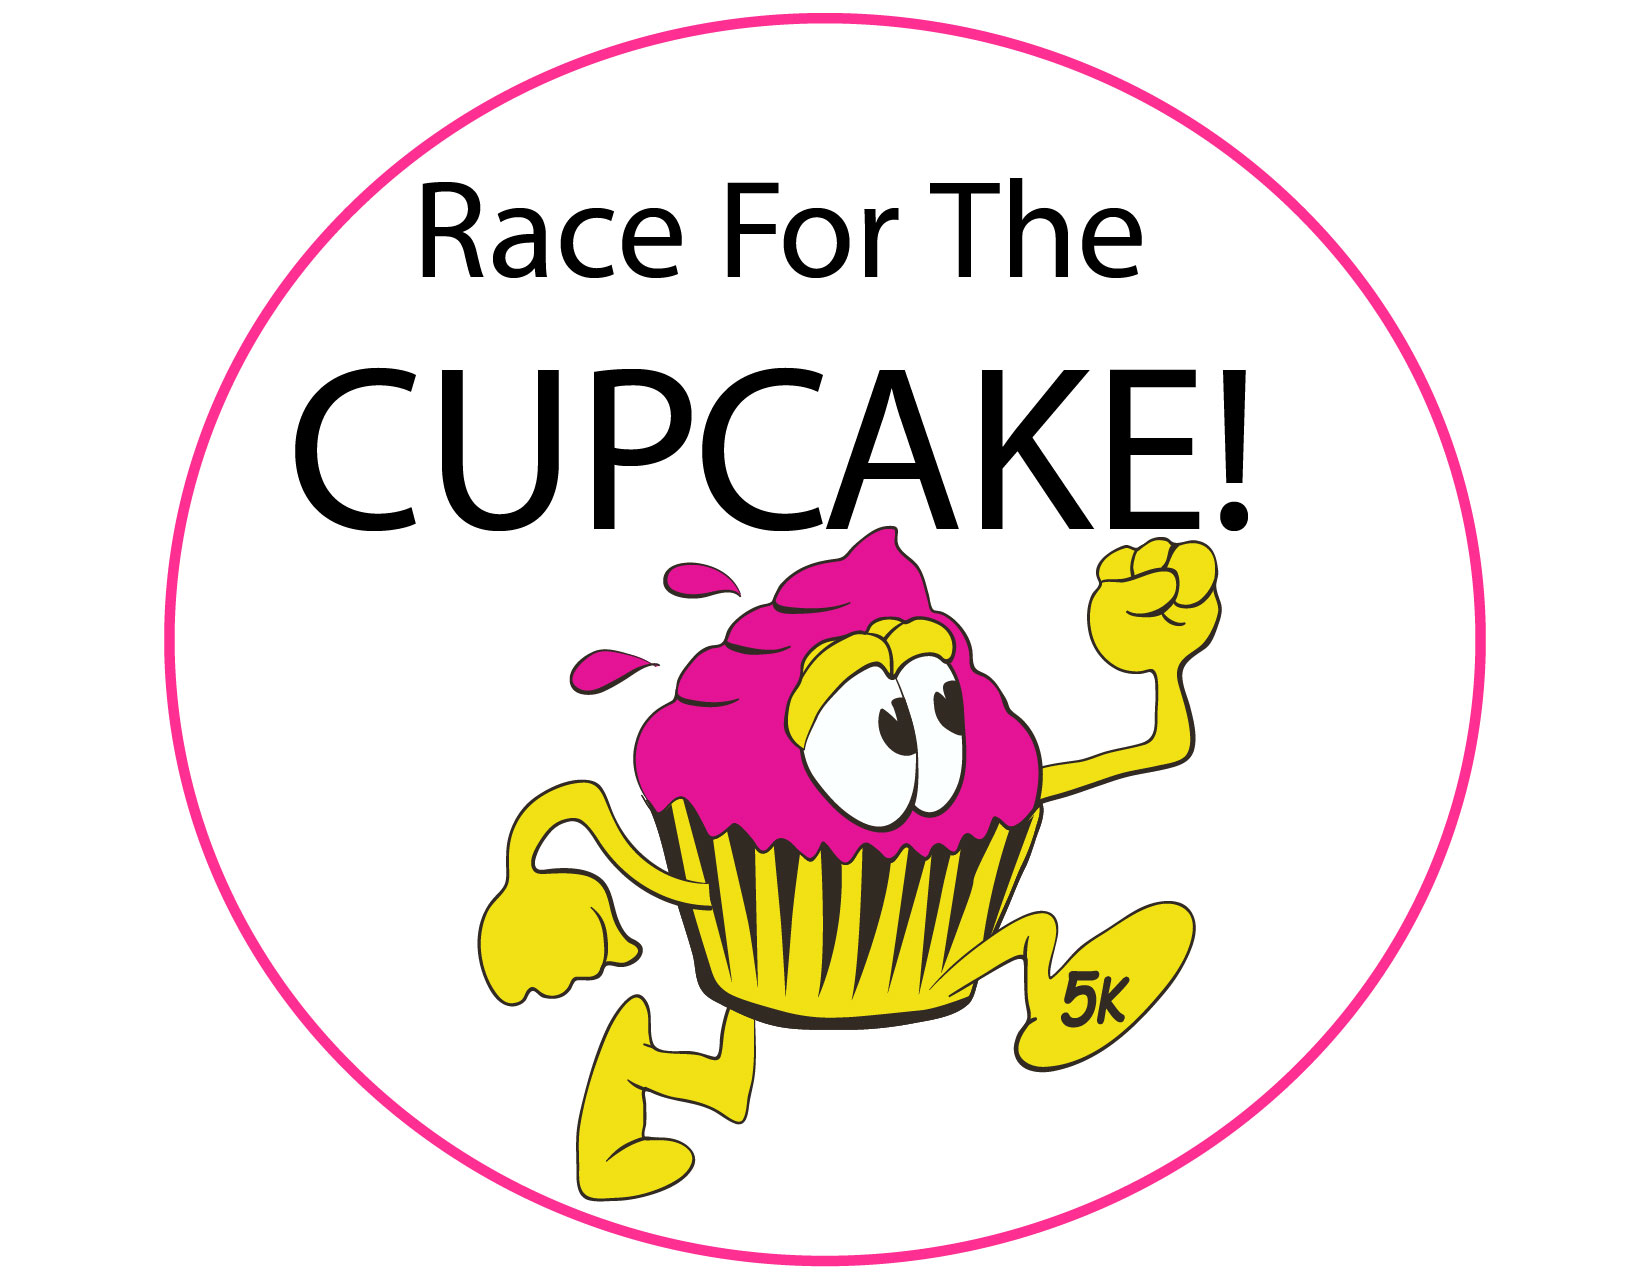 Race for the Cupcake 5k